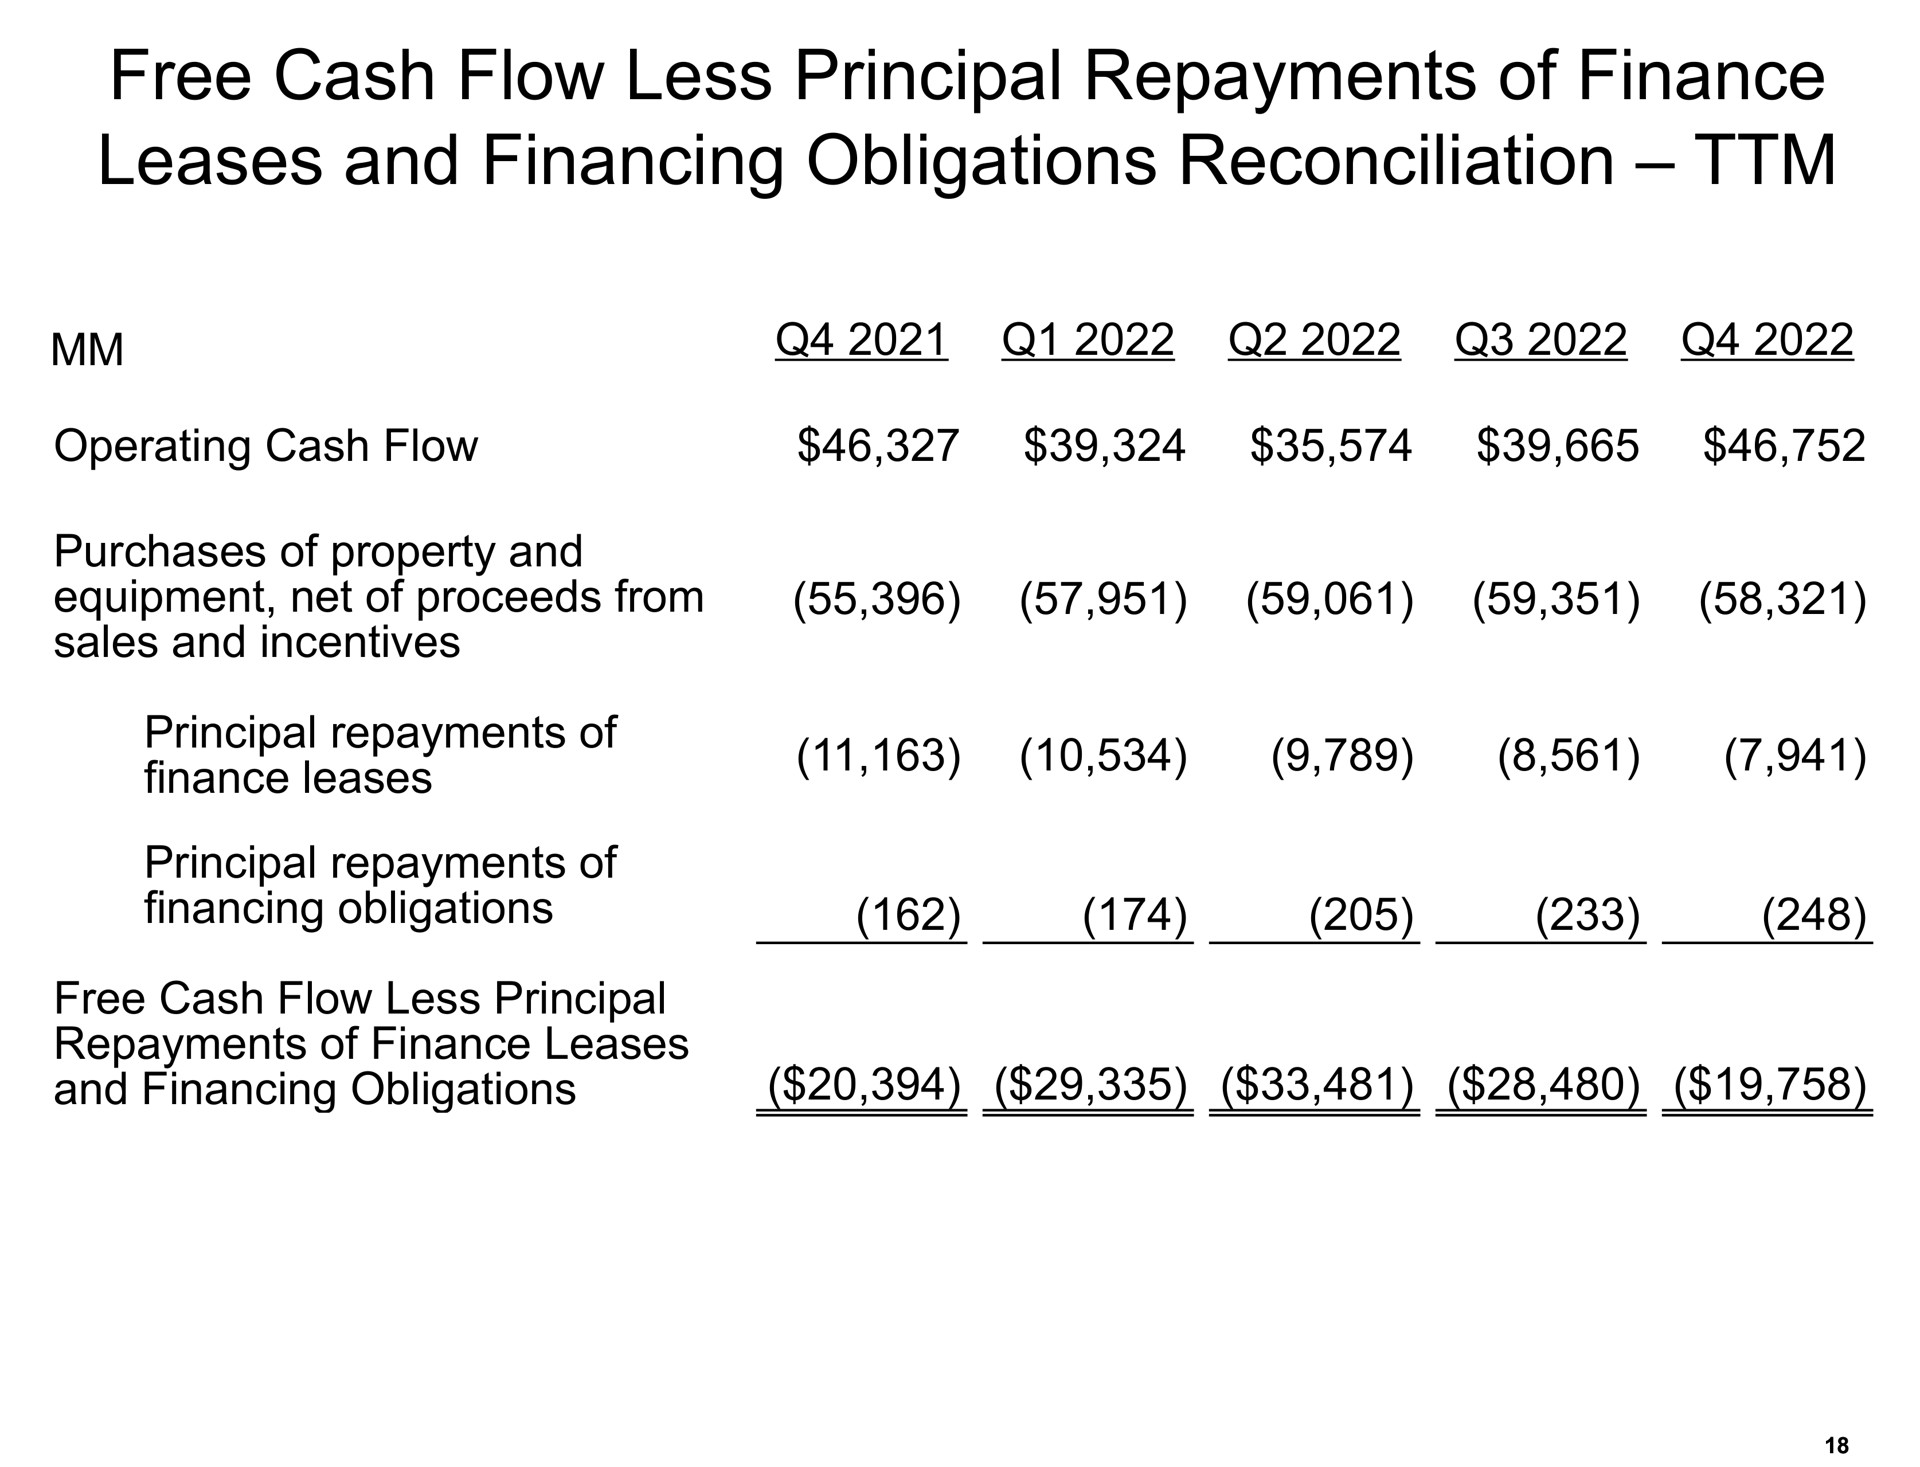 free cash flow less principal repayments of finance leases and financing obligations reconciliation | Amazon